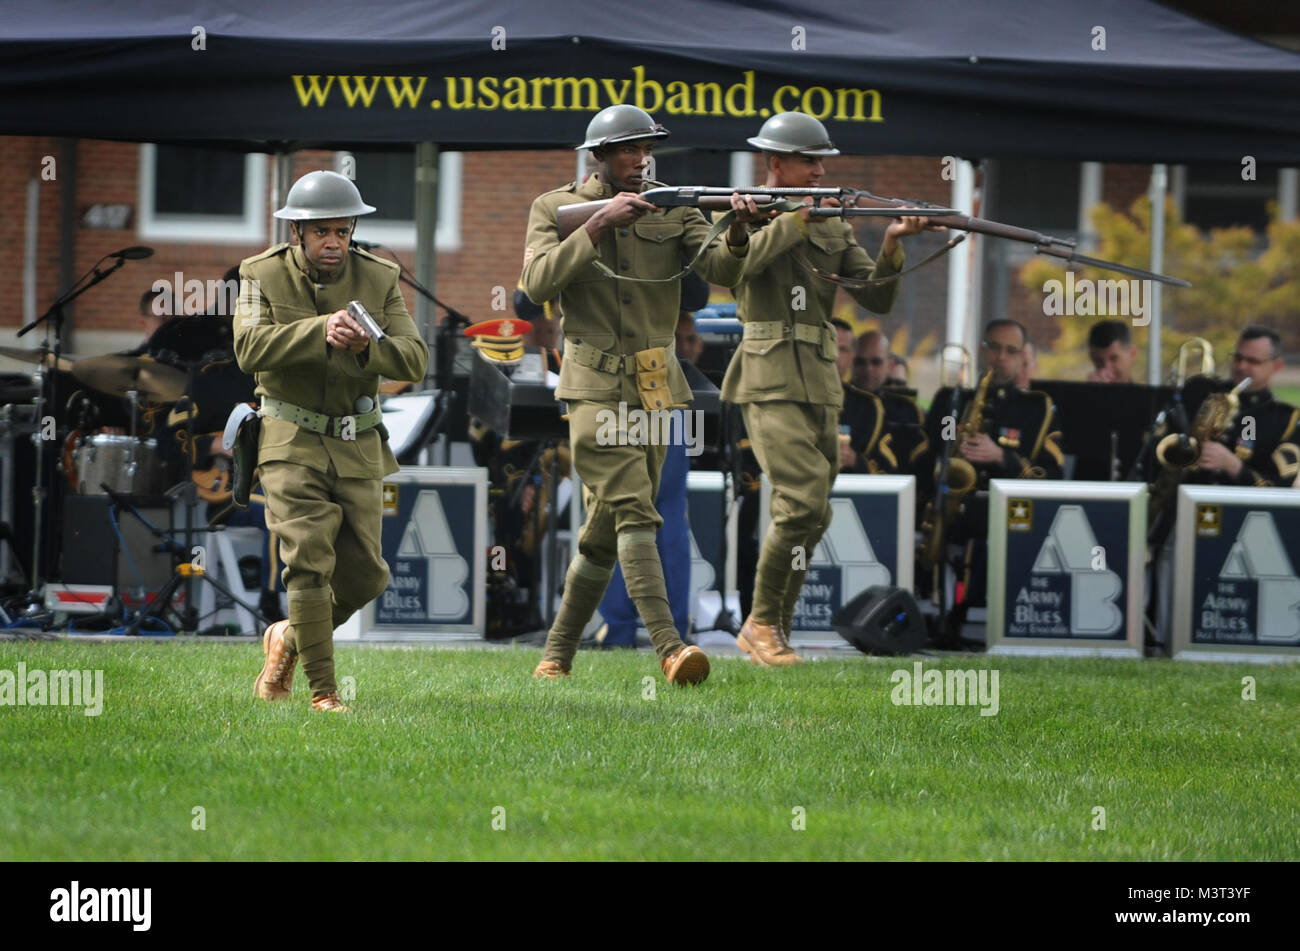 Soldiers from the 3rd U.S. Infantry Regiment (The Old Guard) and The U.S. Army Band (Pershing’s Own) perform World War I “Harlem Hellfighter” demo during Twilight Tattoo 2016 Media Preview Day at Summerall Field, Joint Base Myer-Henderson Hall, Virginia.  Twilight Tattoo, presented on behalf of the U.S. Army, is a fast paced journey that captures 241 years of Soldiers’ stories spanning across generations of men and women who have answered the call to uphold America’s freedom and democracy. The program showcases The Old Guard’s Continental Color Guard, The Commander-in-Chief’s Guard, The U.S. A Stock Photo